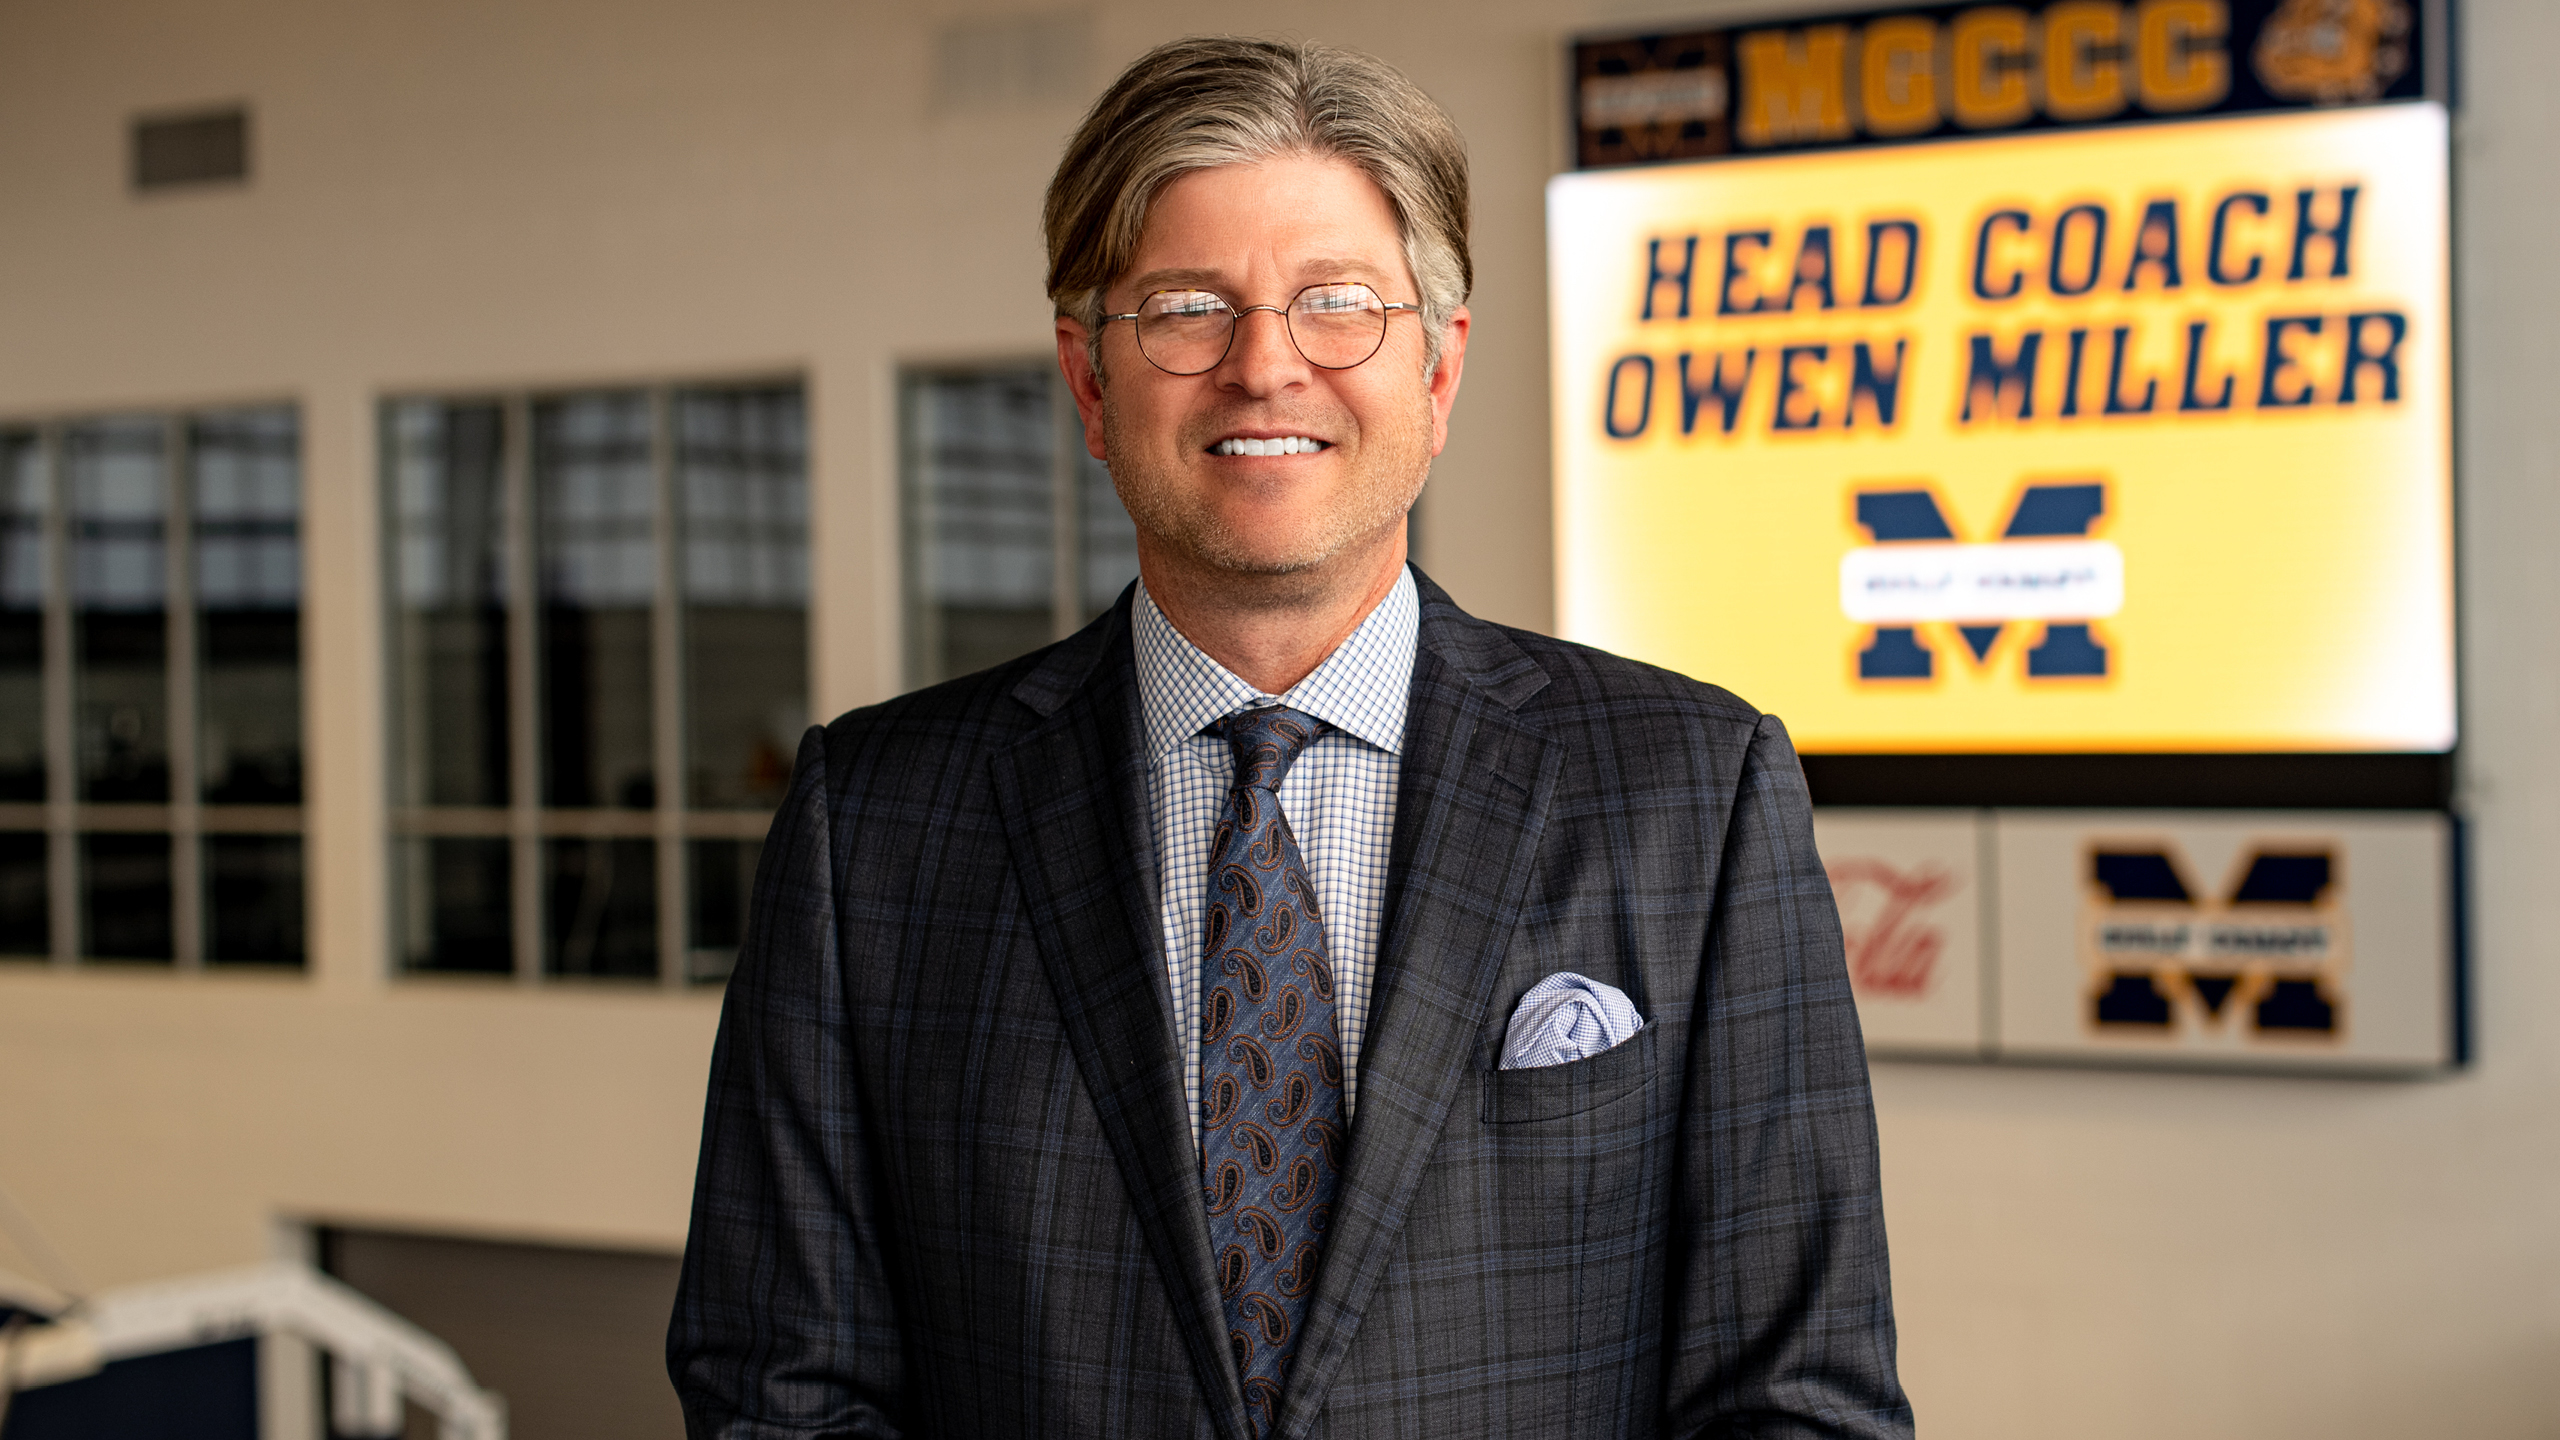 Gulf Coast hires Owen Miller, who brings strong Coast connections